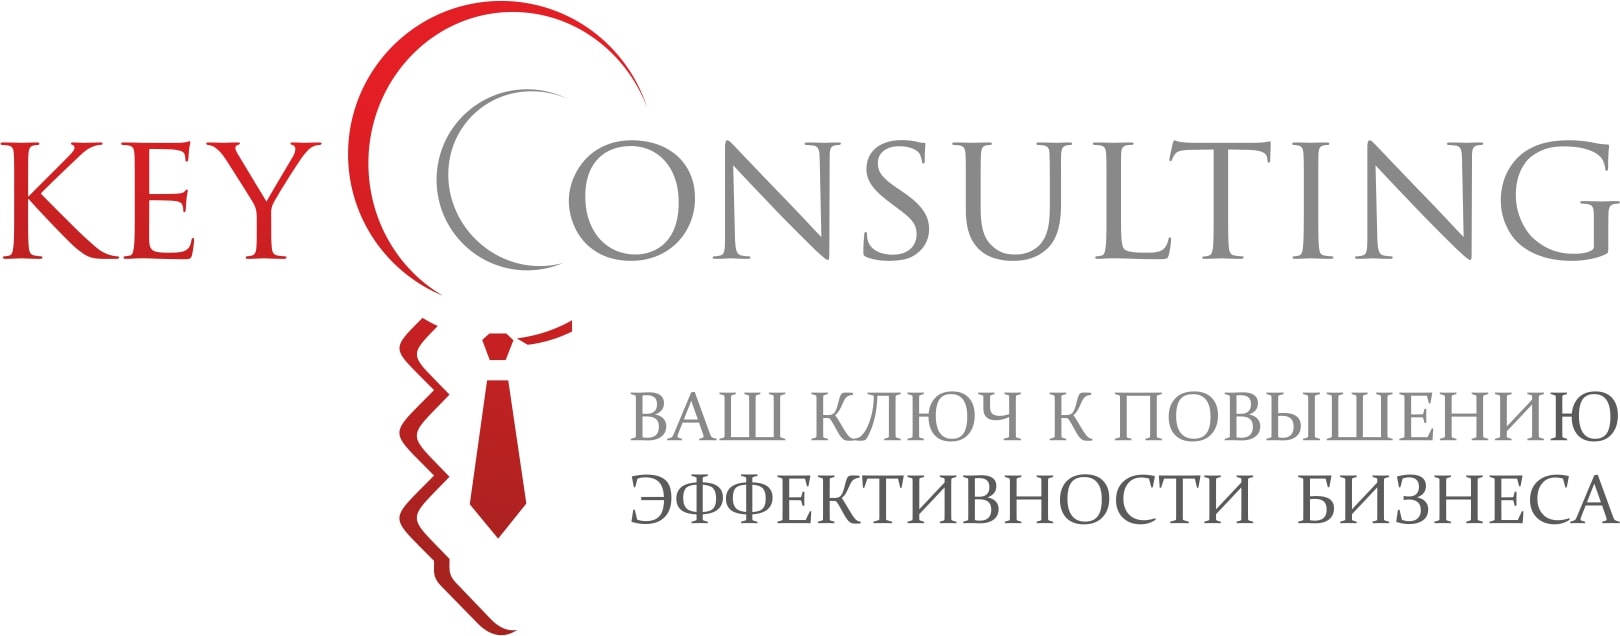 KEY CONSULTING